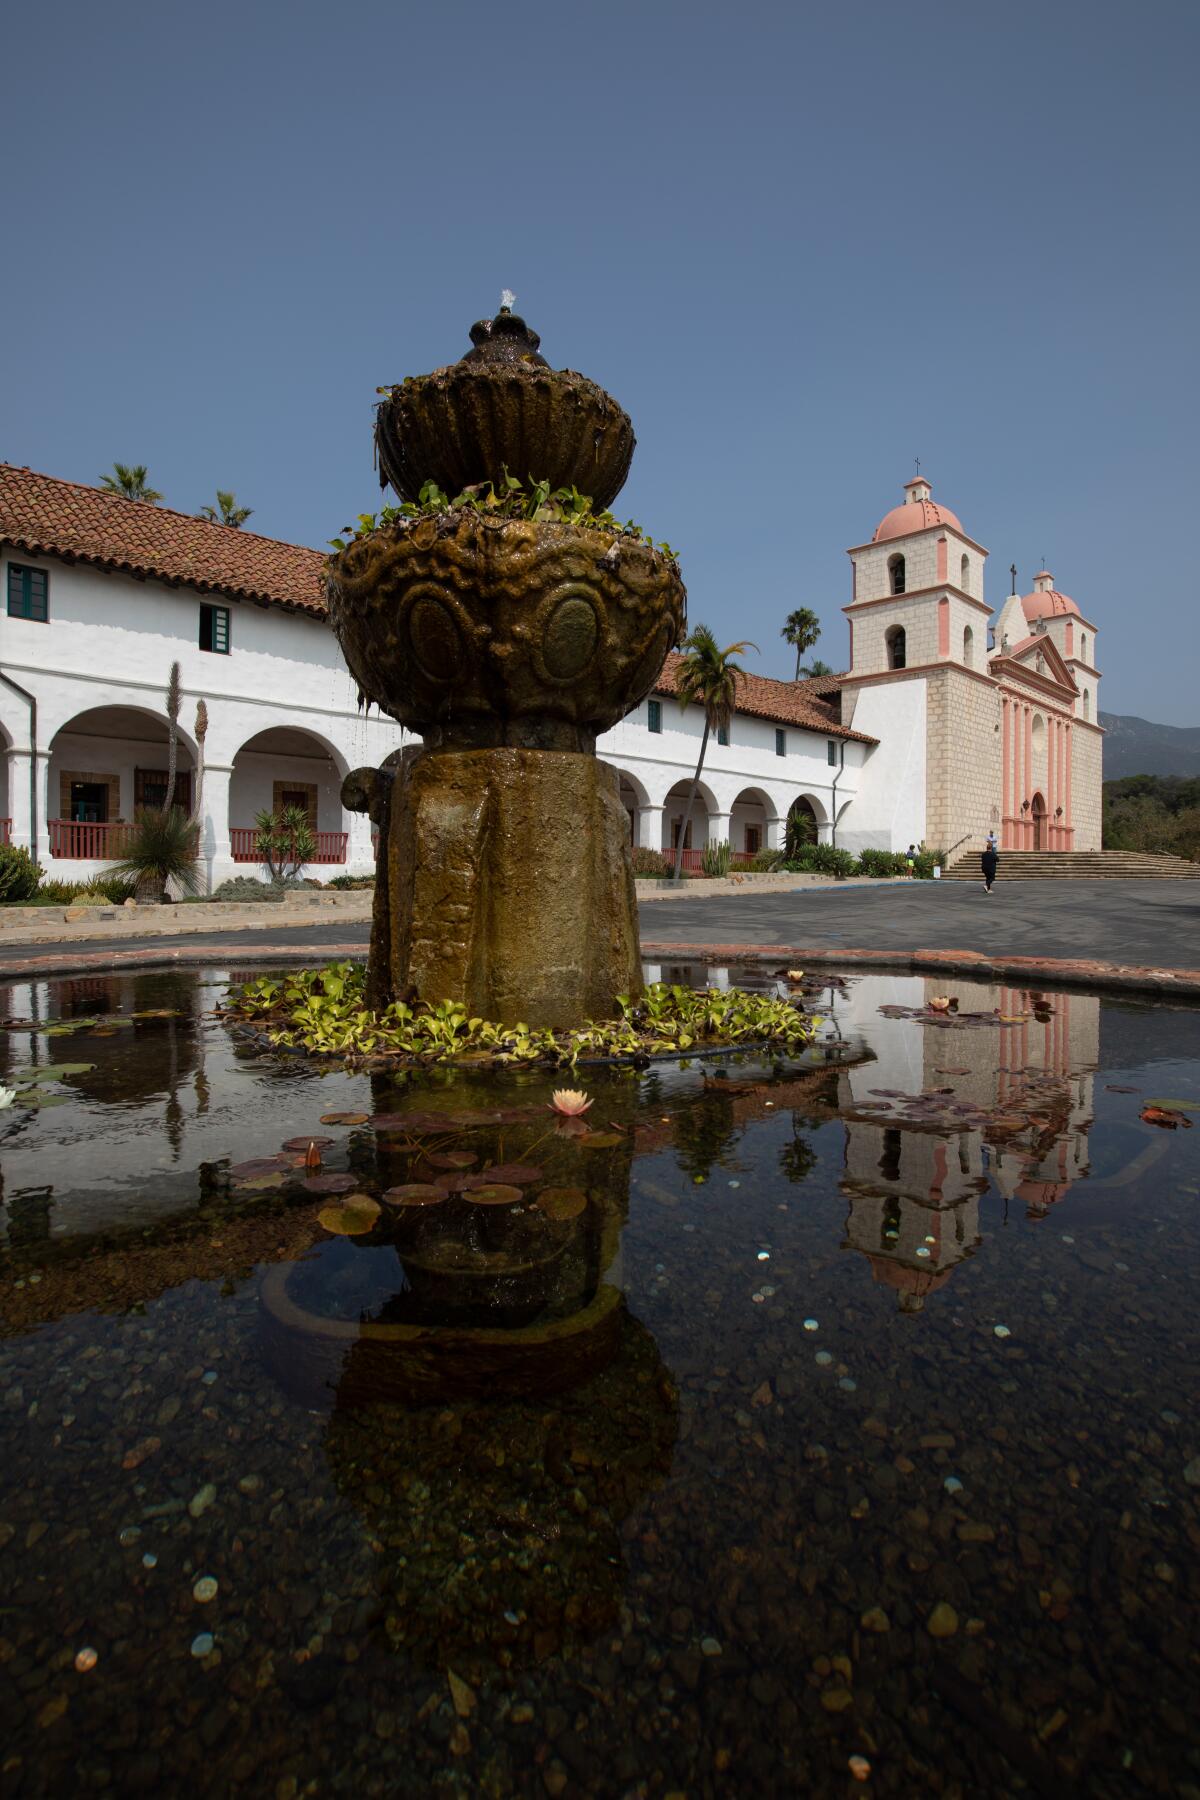 The fountain in front of the Old Santa Barbara Mission dates to 1808.